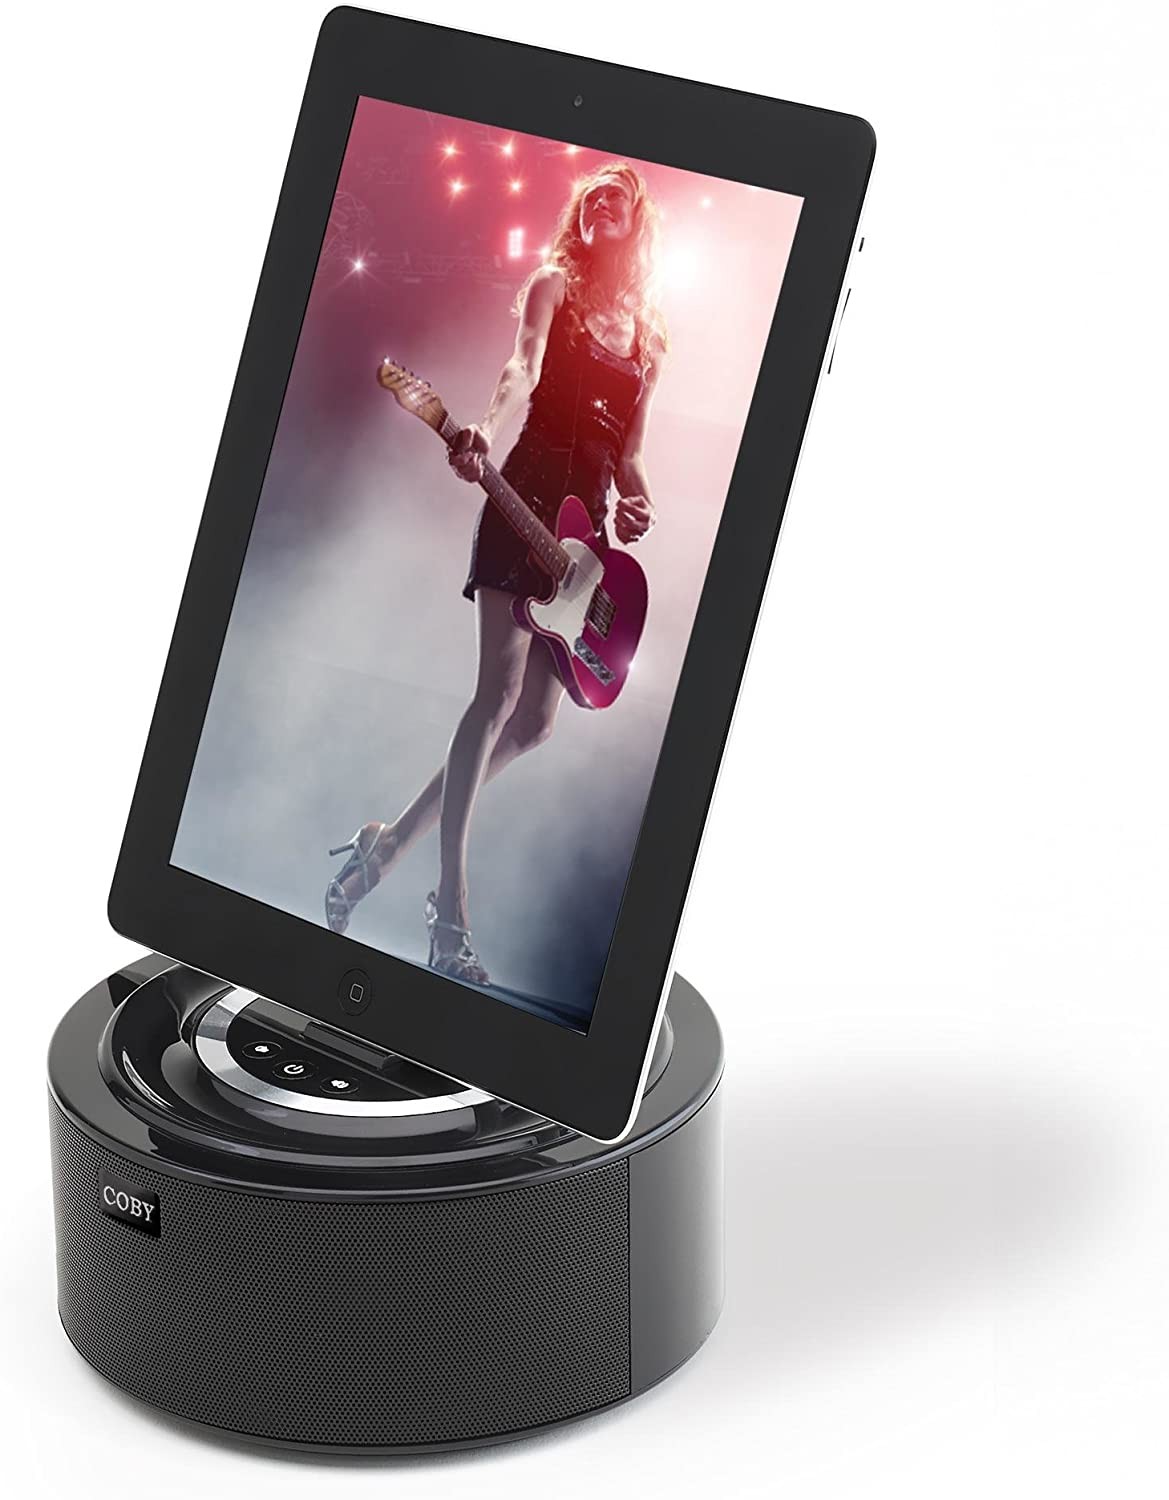 iPod and iPhone Docking Stereo Speaker System (Black)